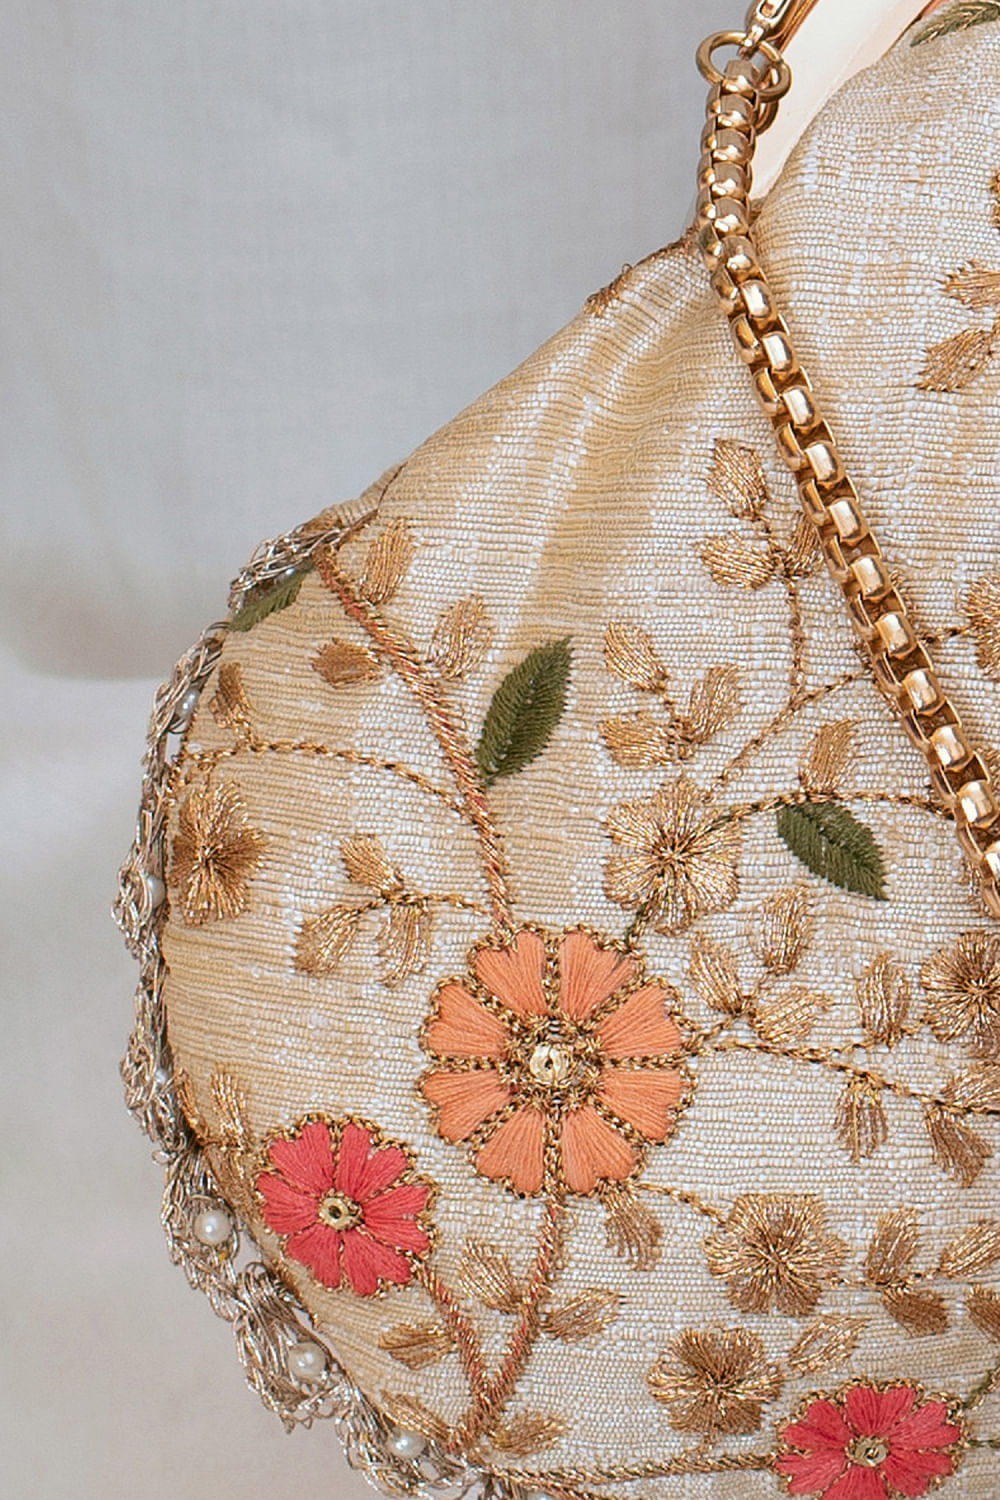 Traditional Embroidered Bag With Tassels. Mexican Morral Bag. Hand Embroidered  Floral Bag.hand Knit Strap. Colorful Mexican Bag.floral Purse - Etsy |  Embroidered bag, Bags, Embroidery bags